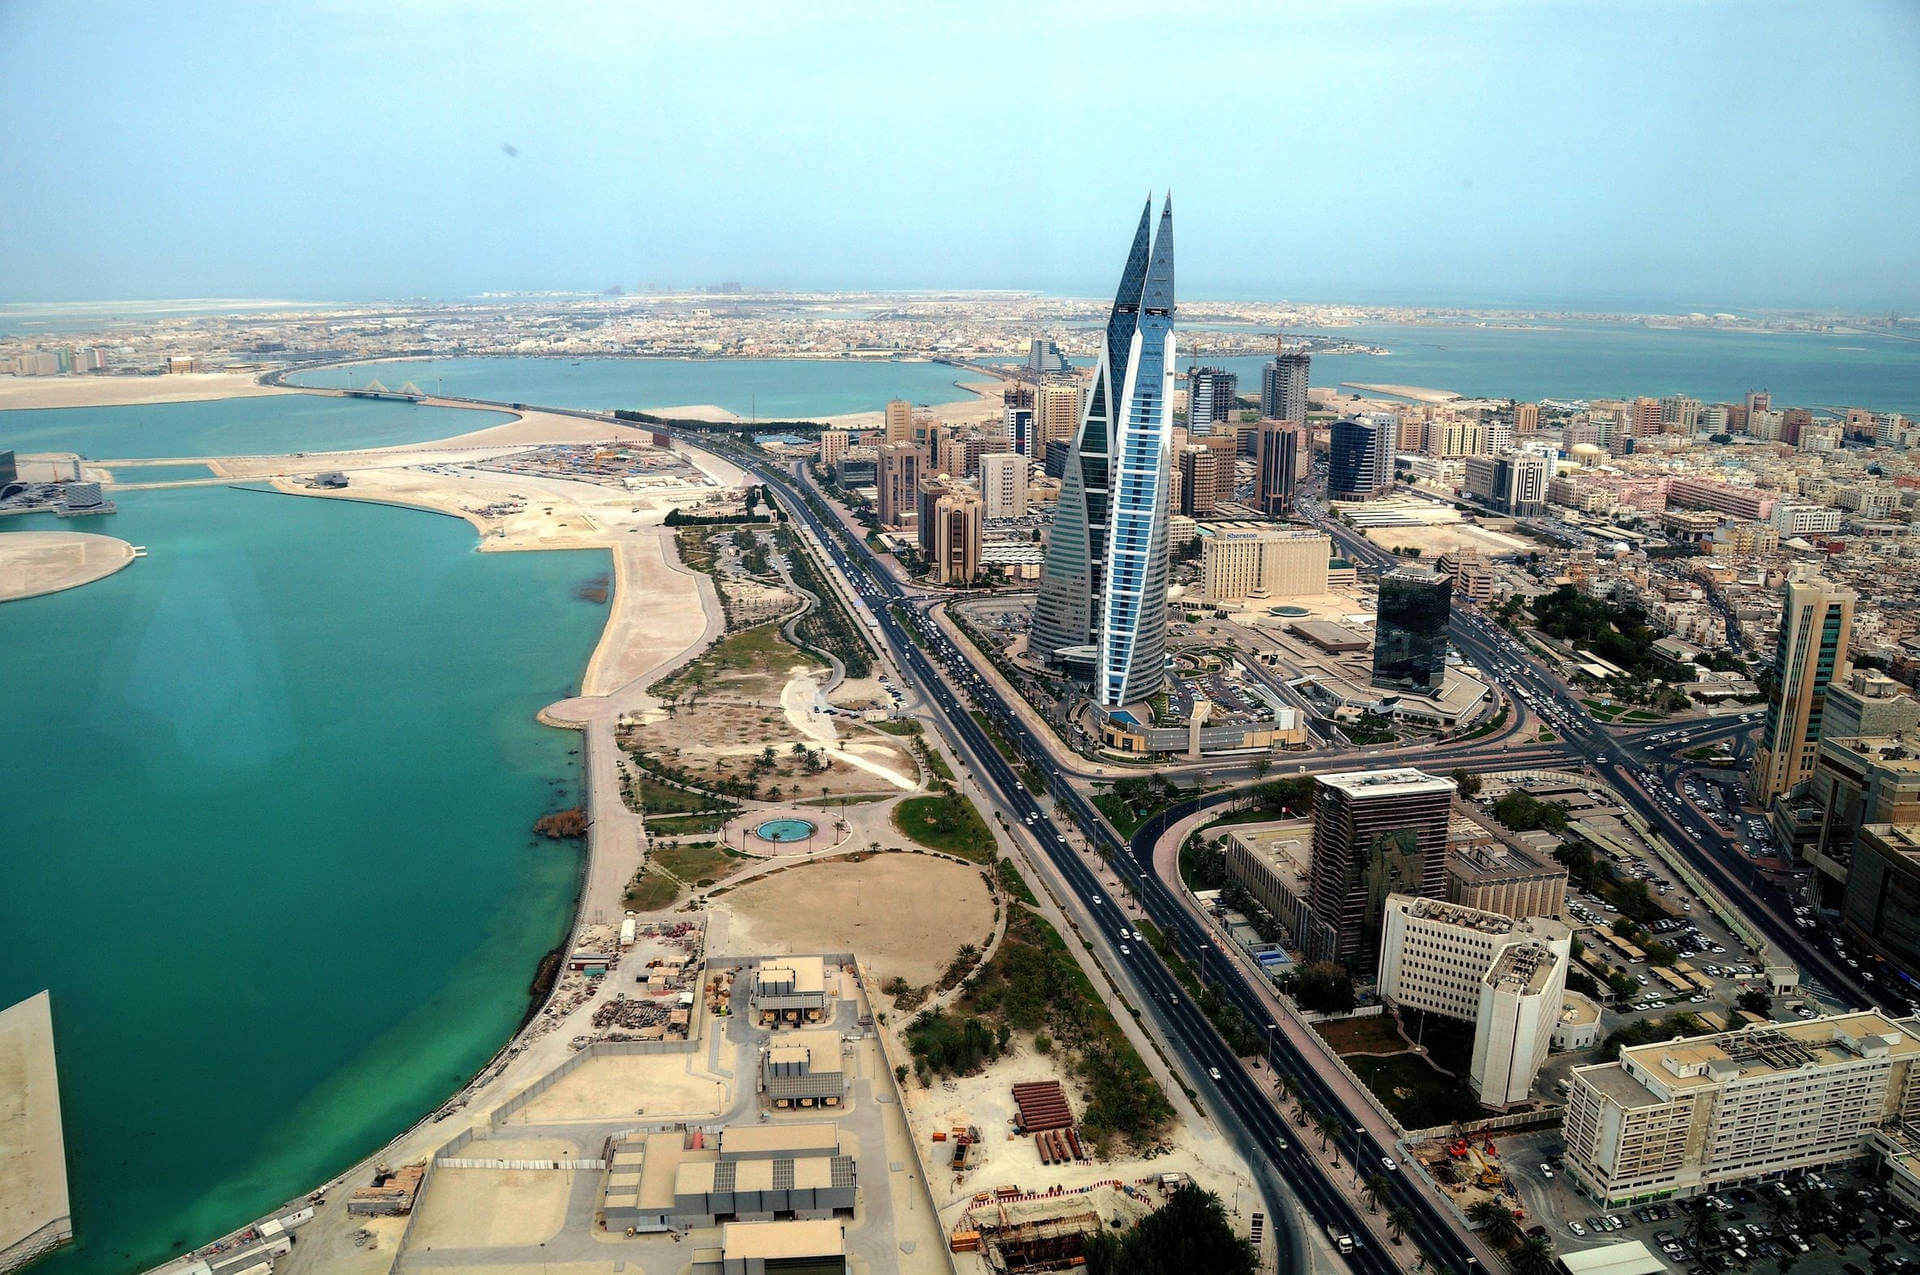 Bahrain 4 Star Holiday Travel & Tour Package